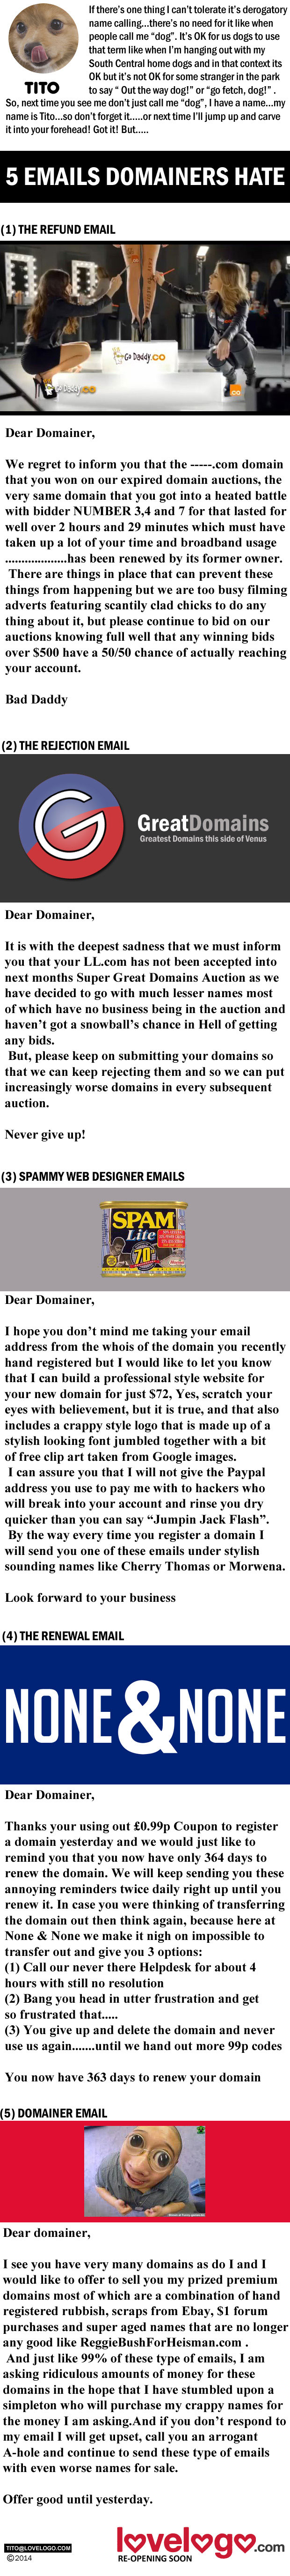 domainer emails